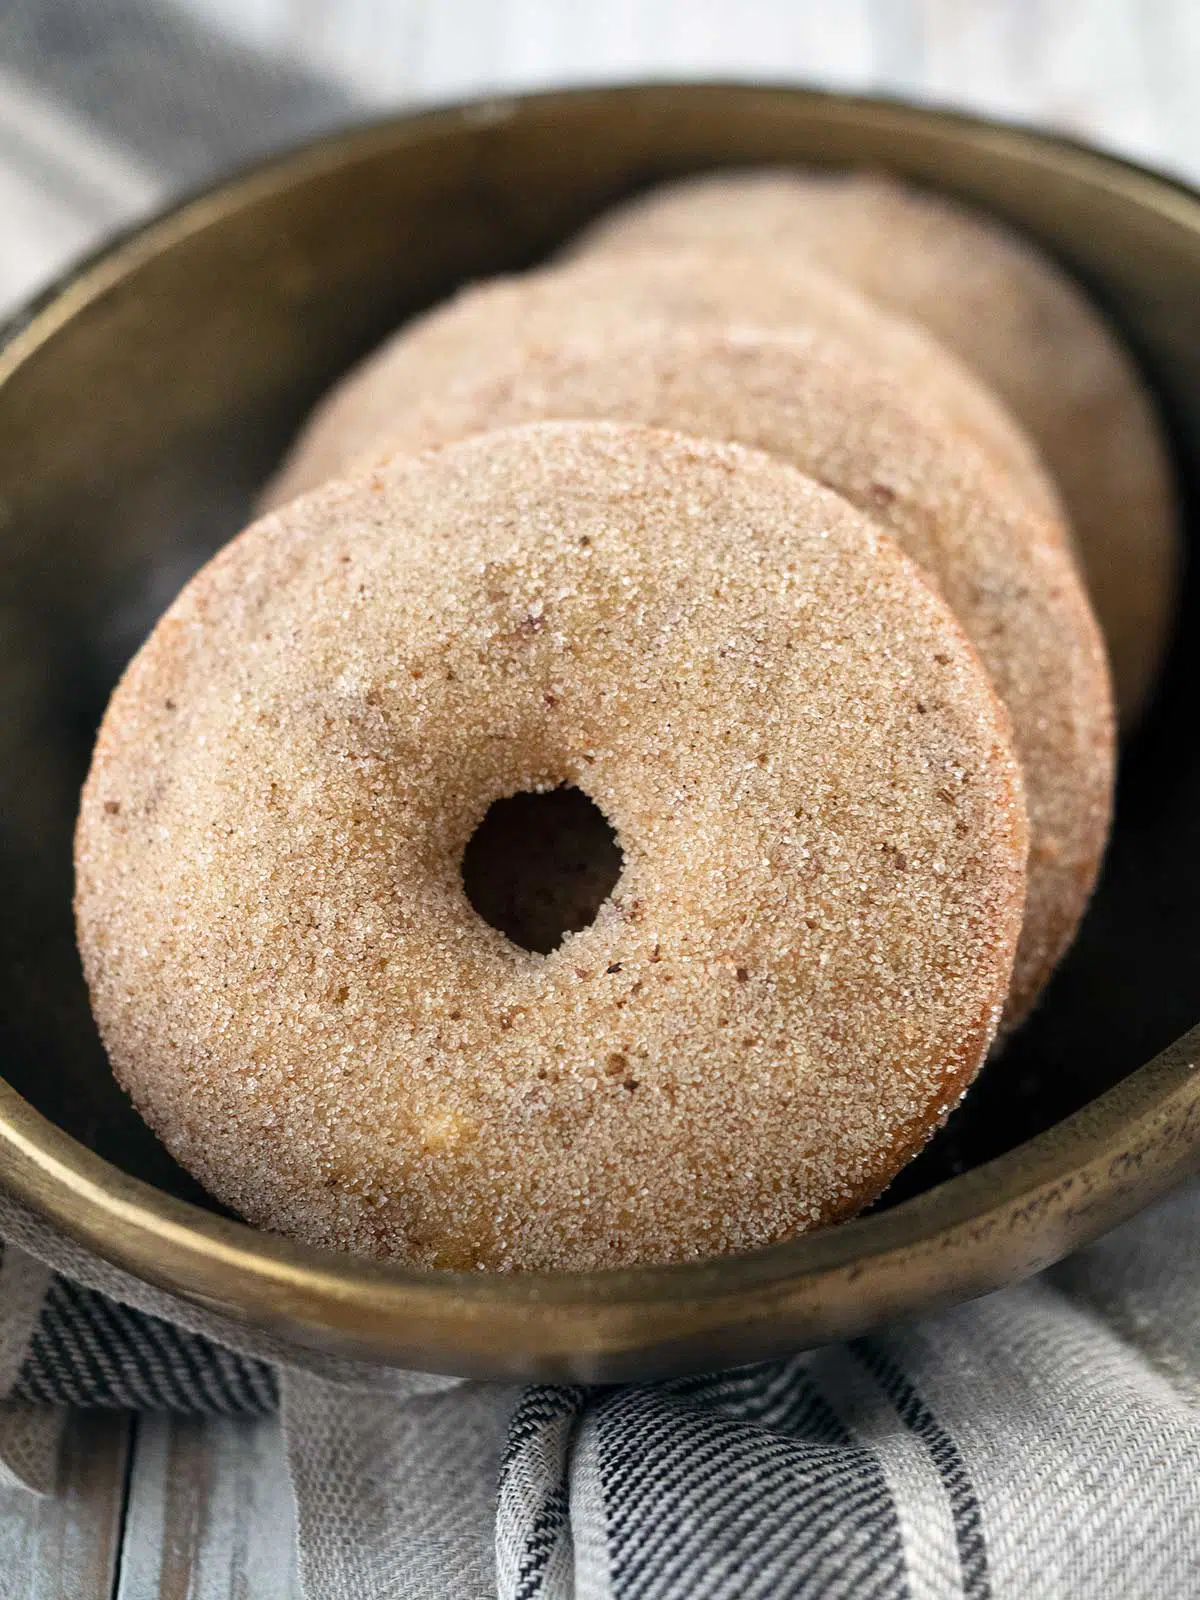 https://bellyrumbles.com/wp-content/uploads/2021/08/date-donuts-baked-in-the-oven.jpg.webp